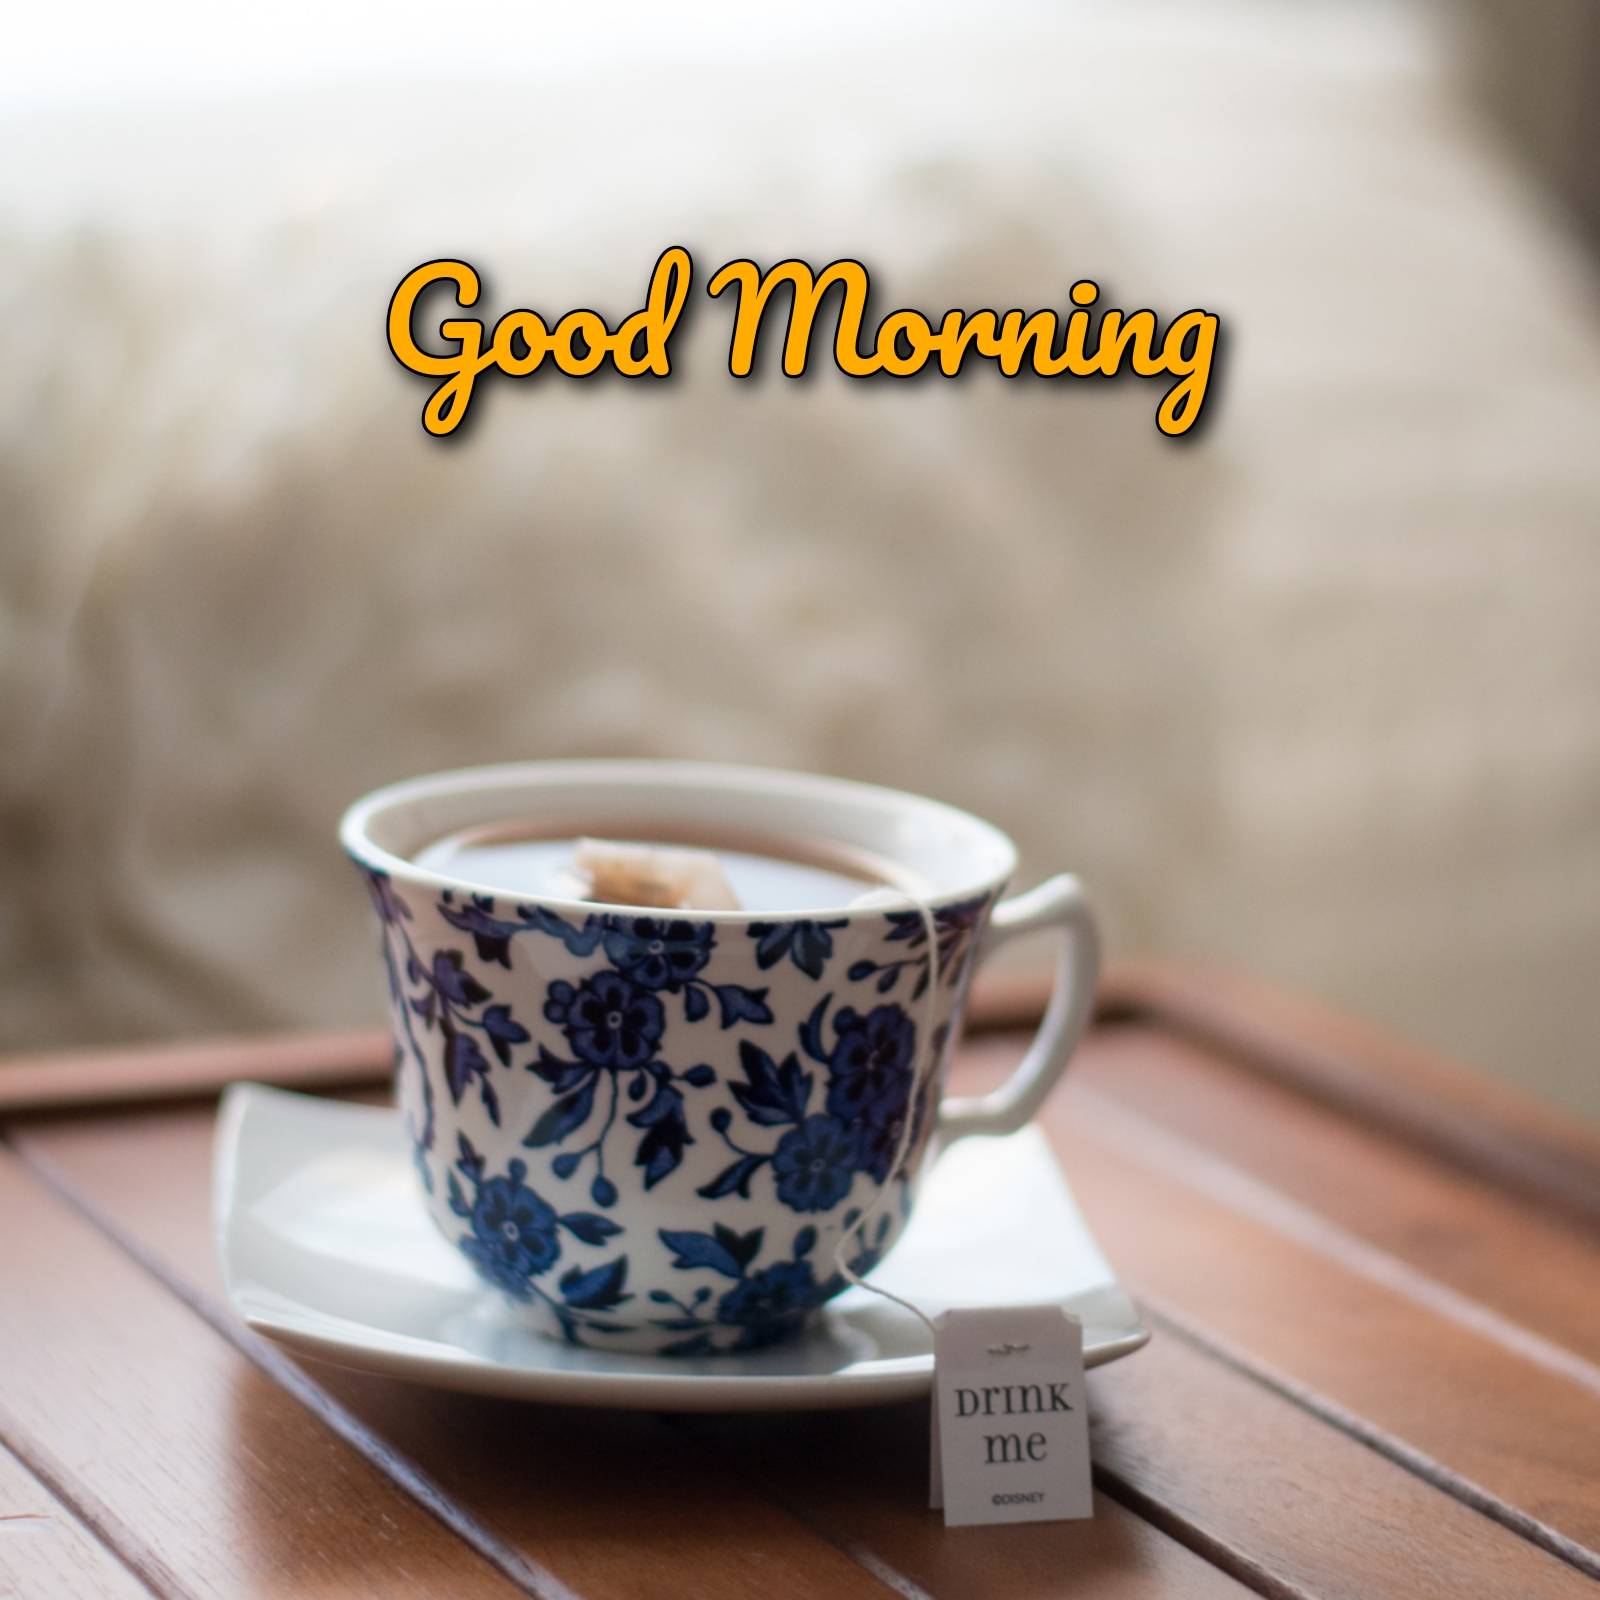 Coffee With Good Morning Images